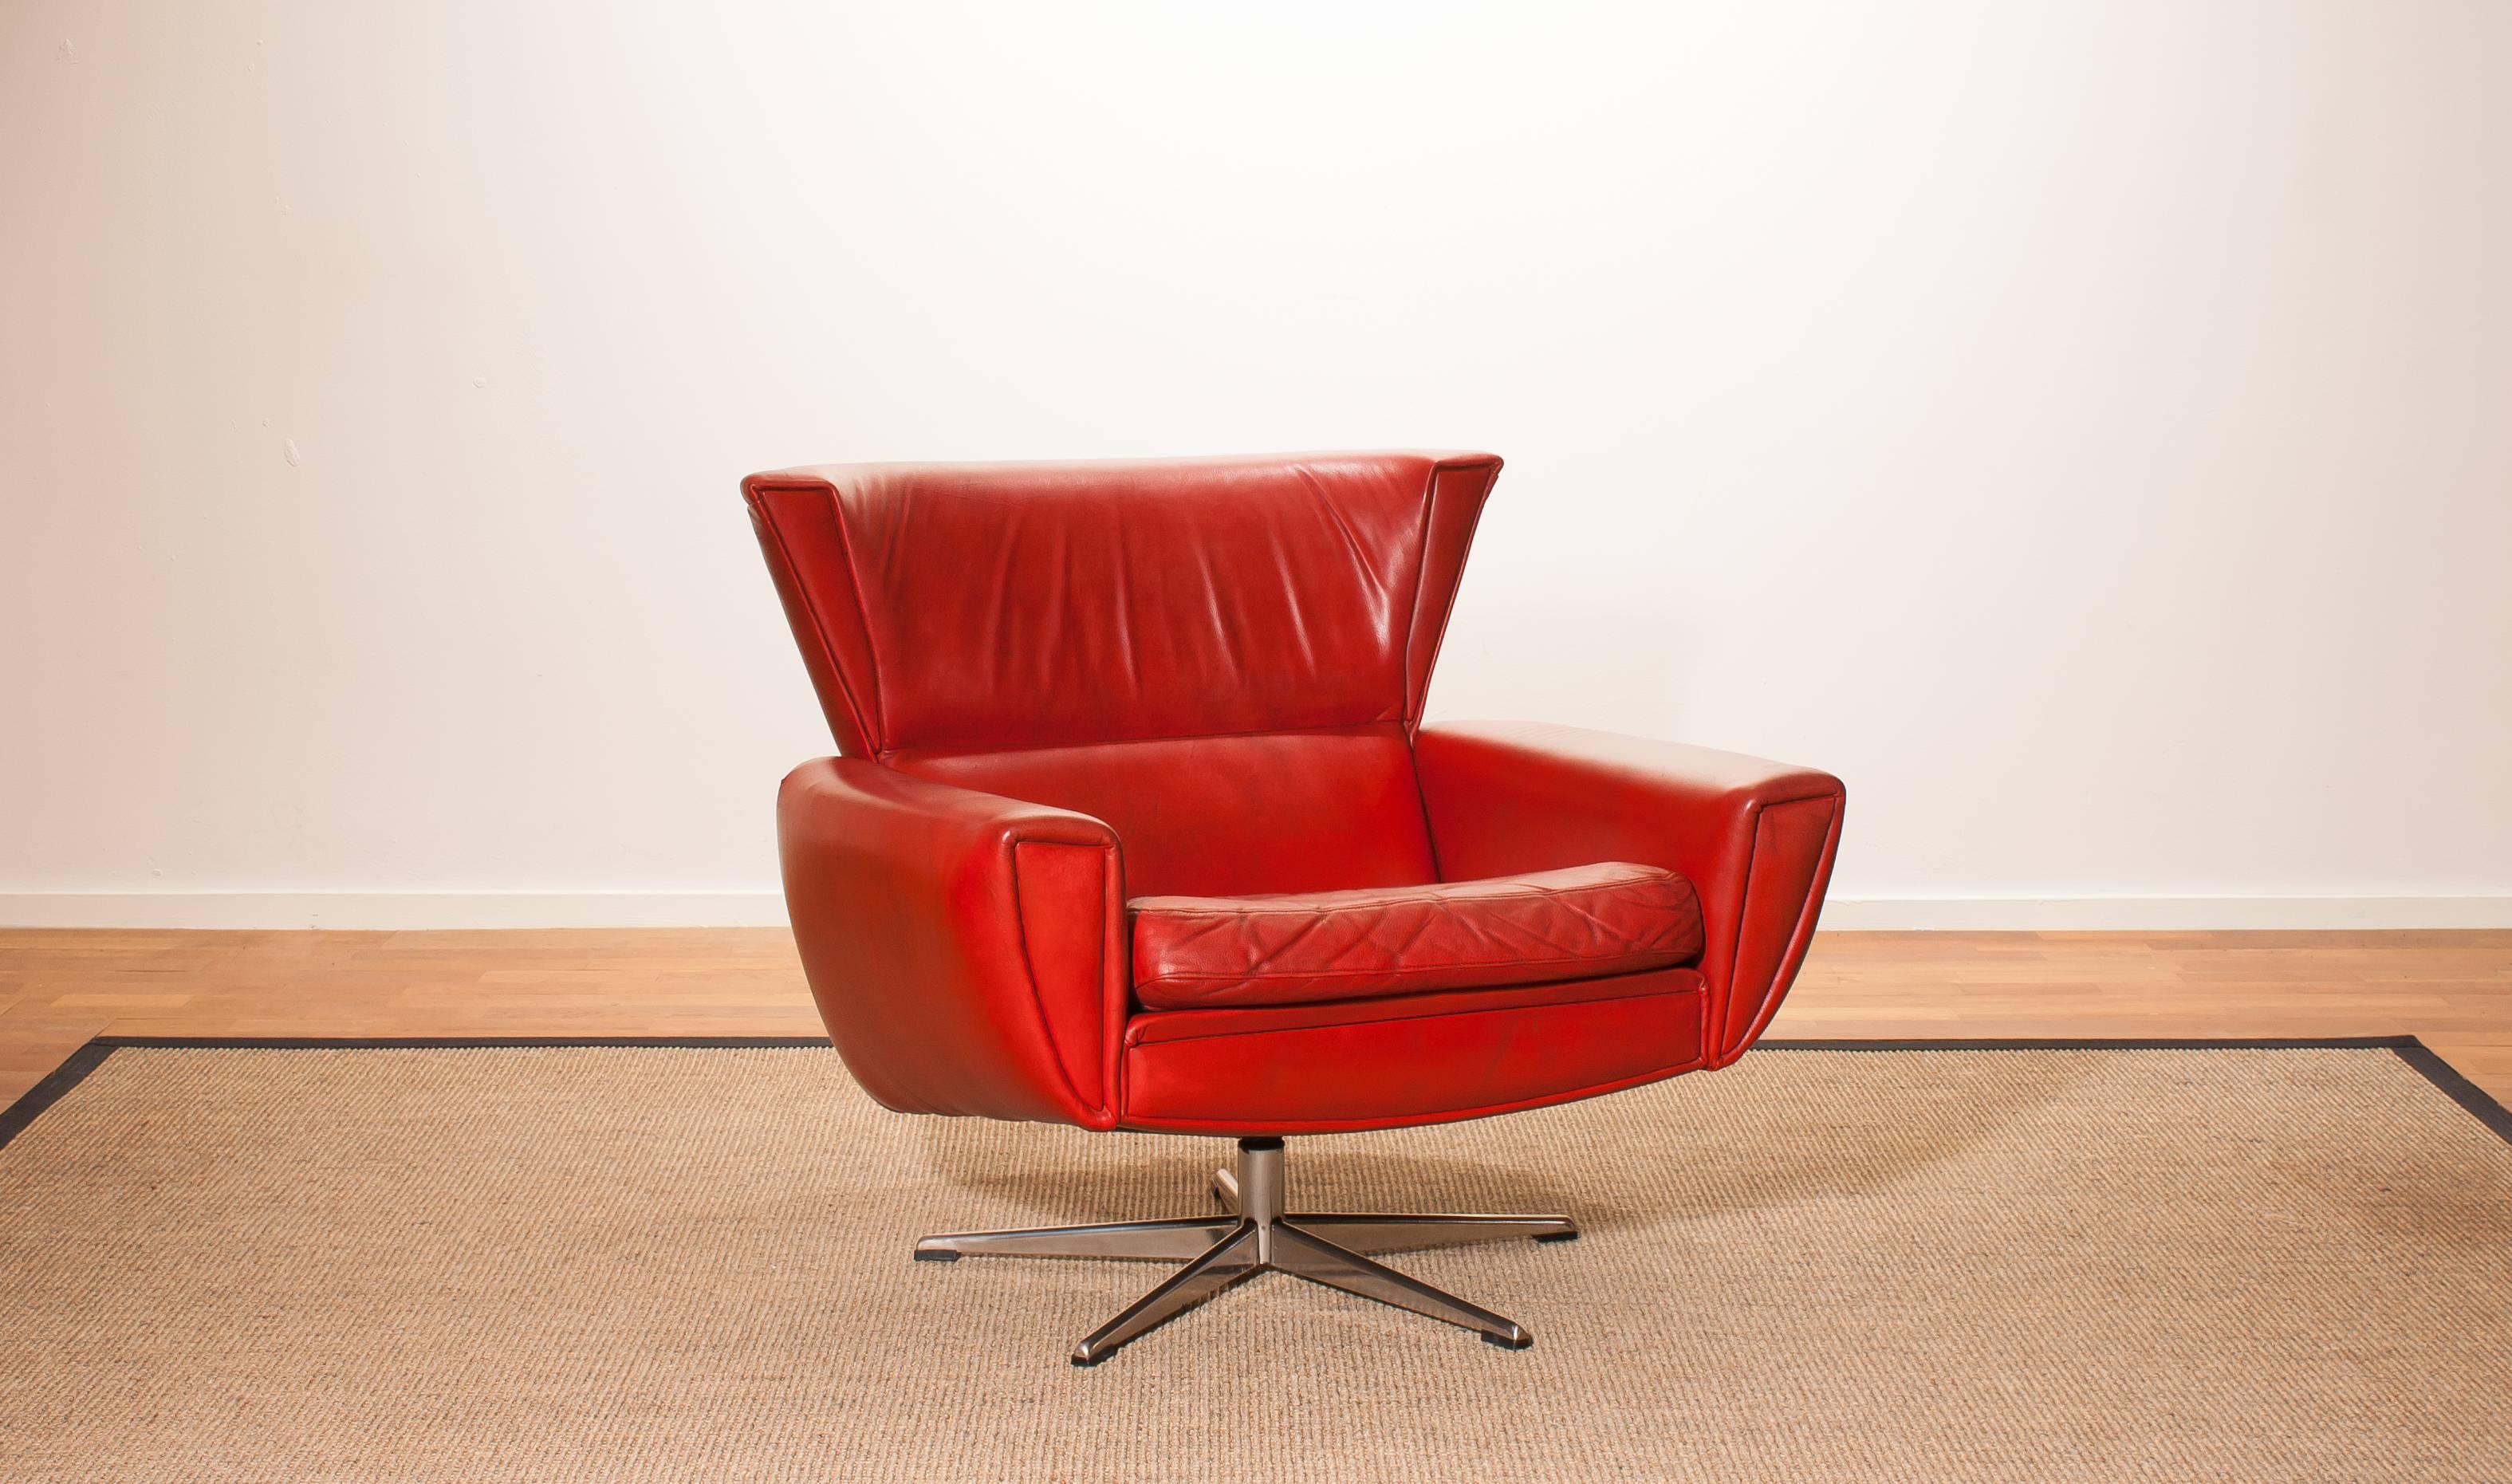 Beautiful lounge swivel club chair by Georg Thams for Lystager Industri Denmark.
This chair is upholstered with red leather on a steel swivel stand.
It is in a wonderful used condition.
Period 1970s
Dimensions: H 74 cm, W 84 cm, D 75 cm, Sh 41